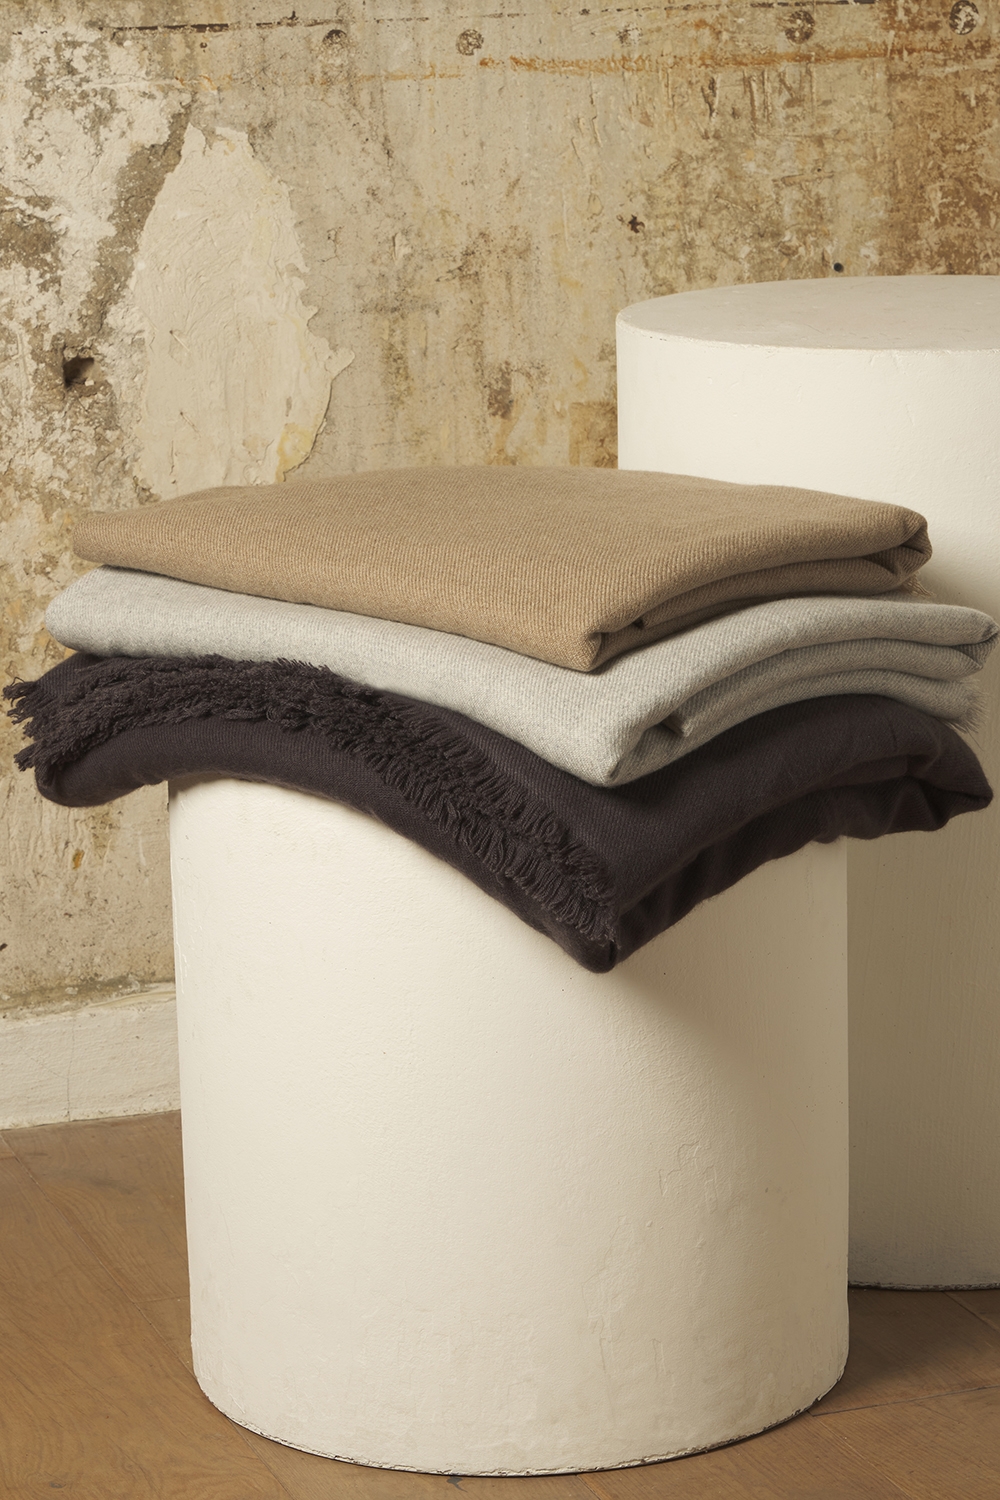 Cashmere accessories cocooning zazoo mixed 220 x 220 charcoal marl 220 x 220 cm